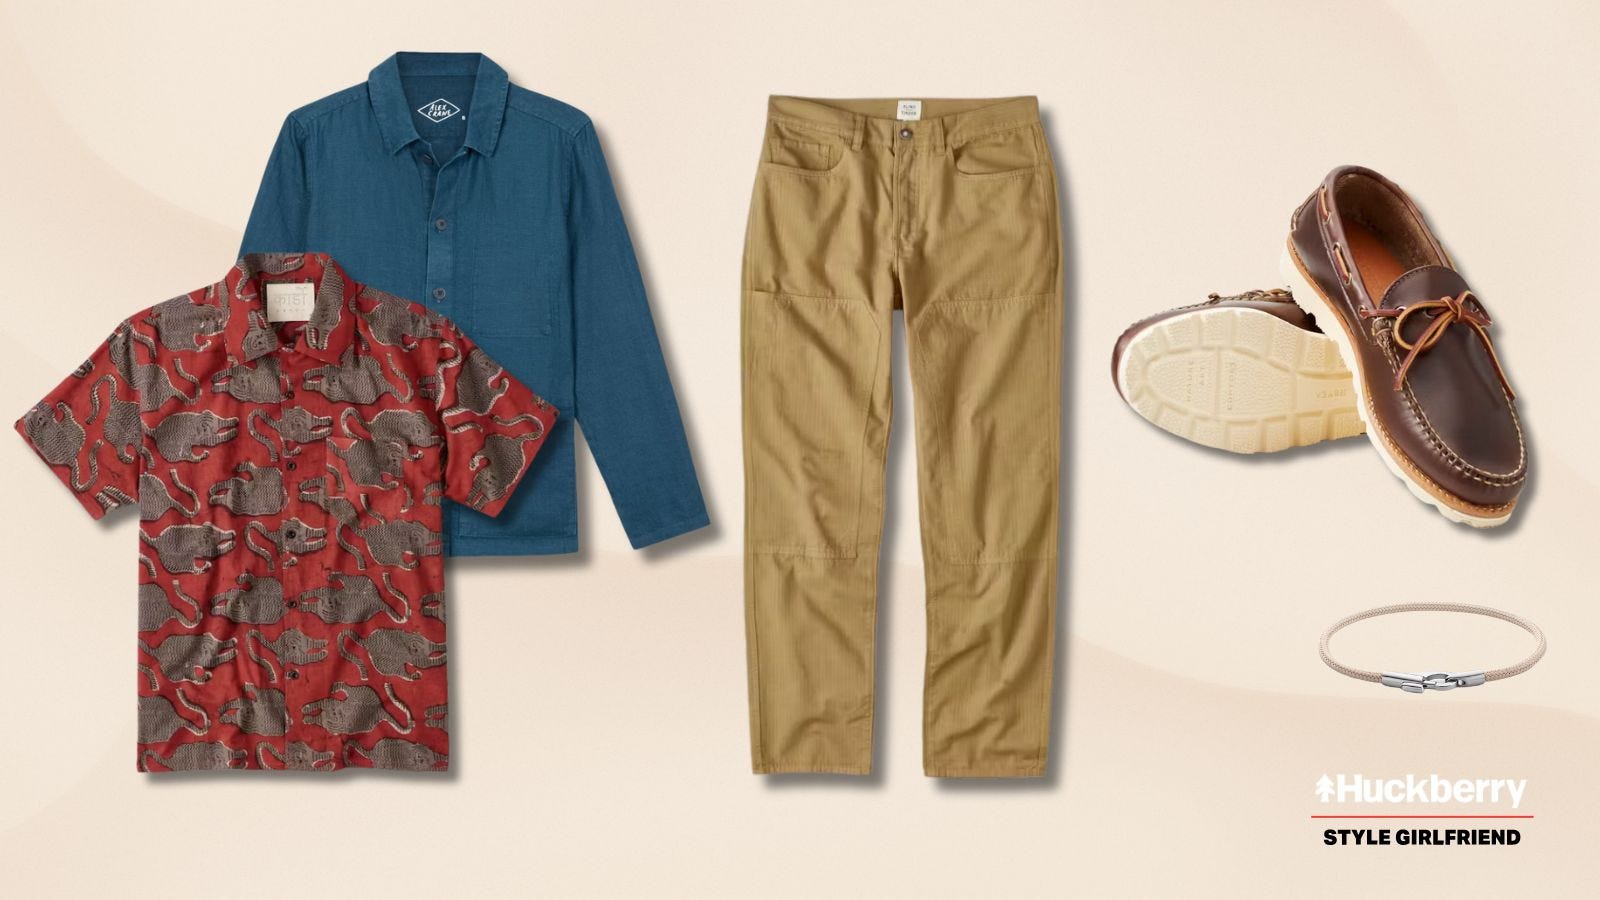 men's casual outfit featuring a red patterned short-sleeve shirt, blue overshirt, tan pants, and brown leather boat shoes